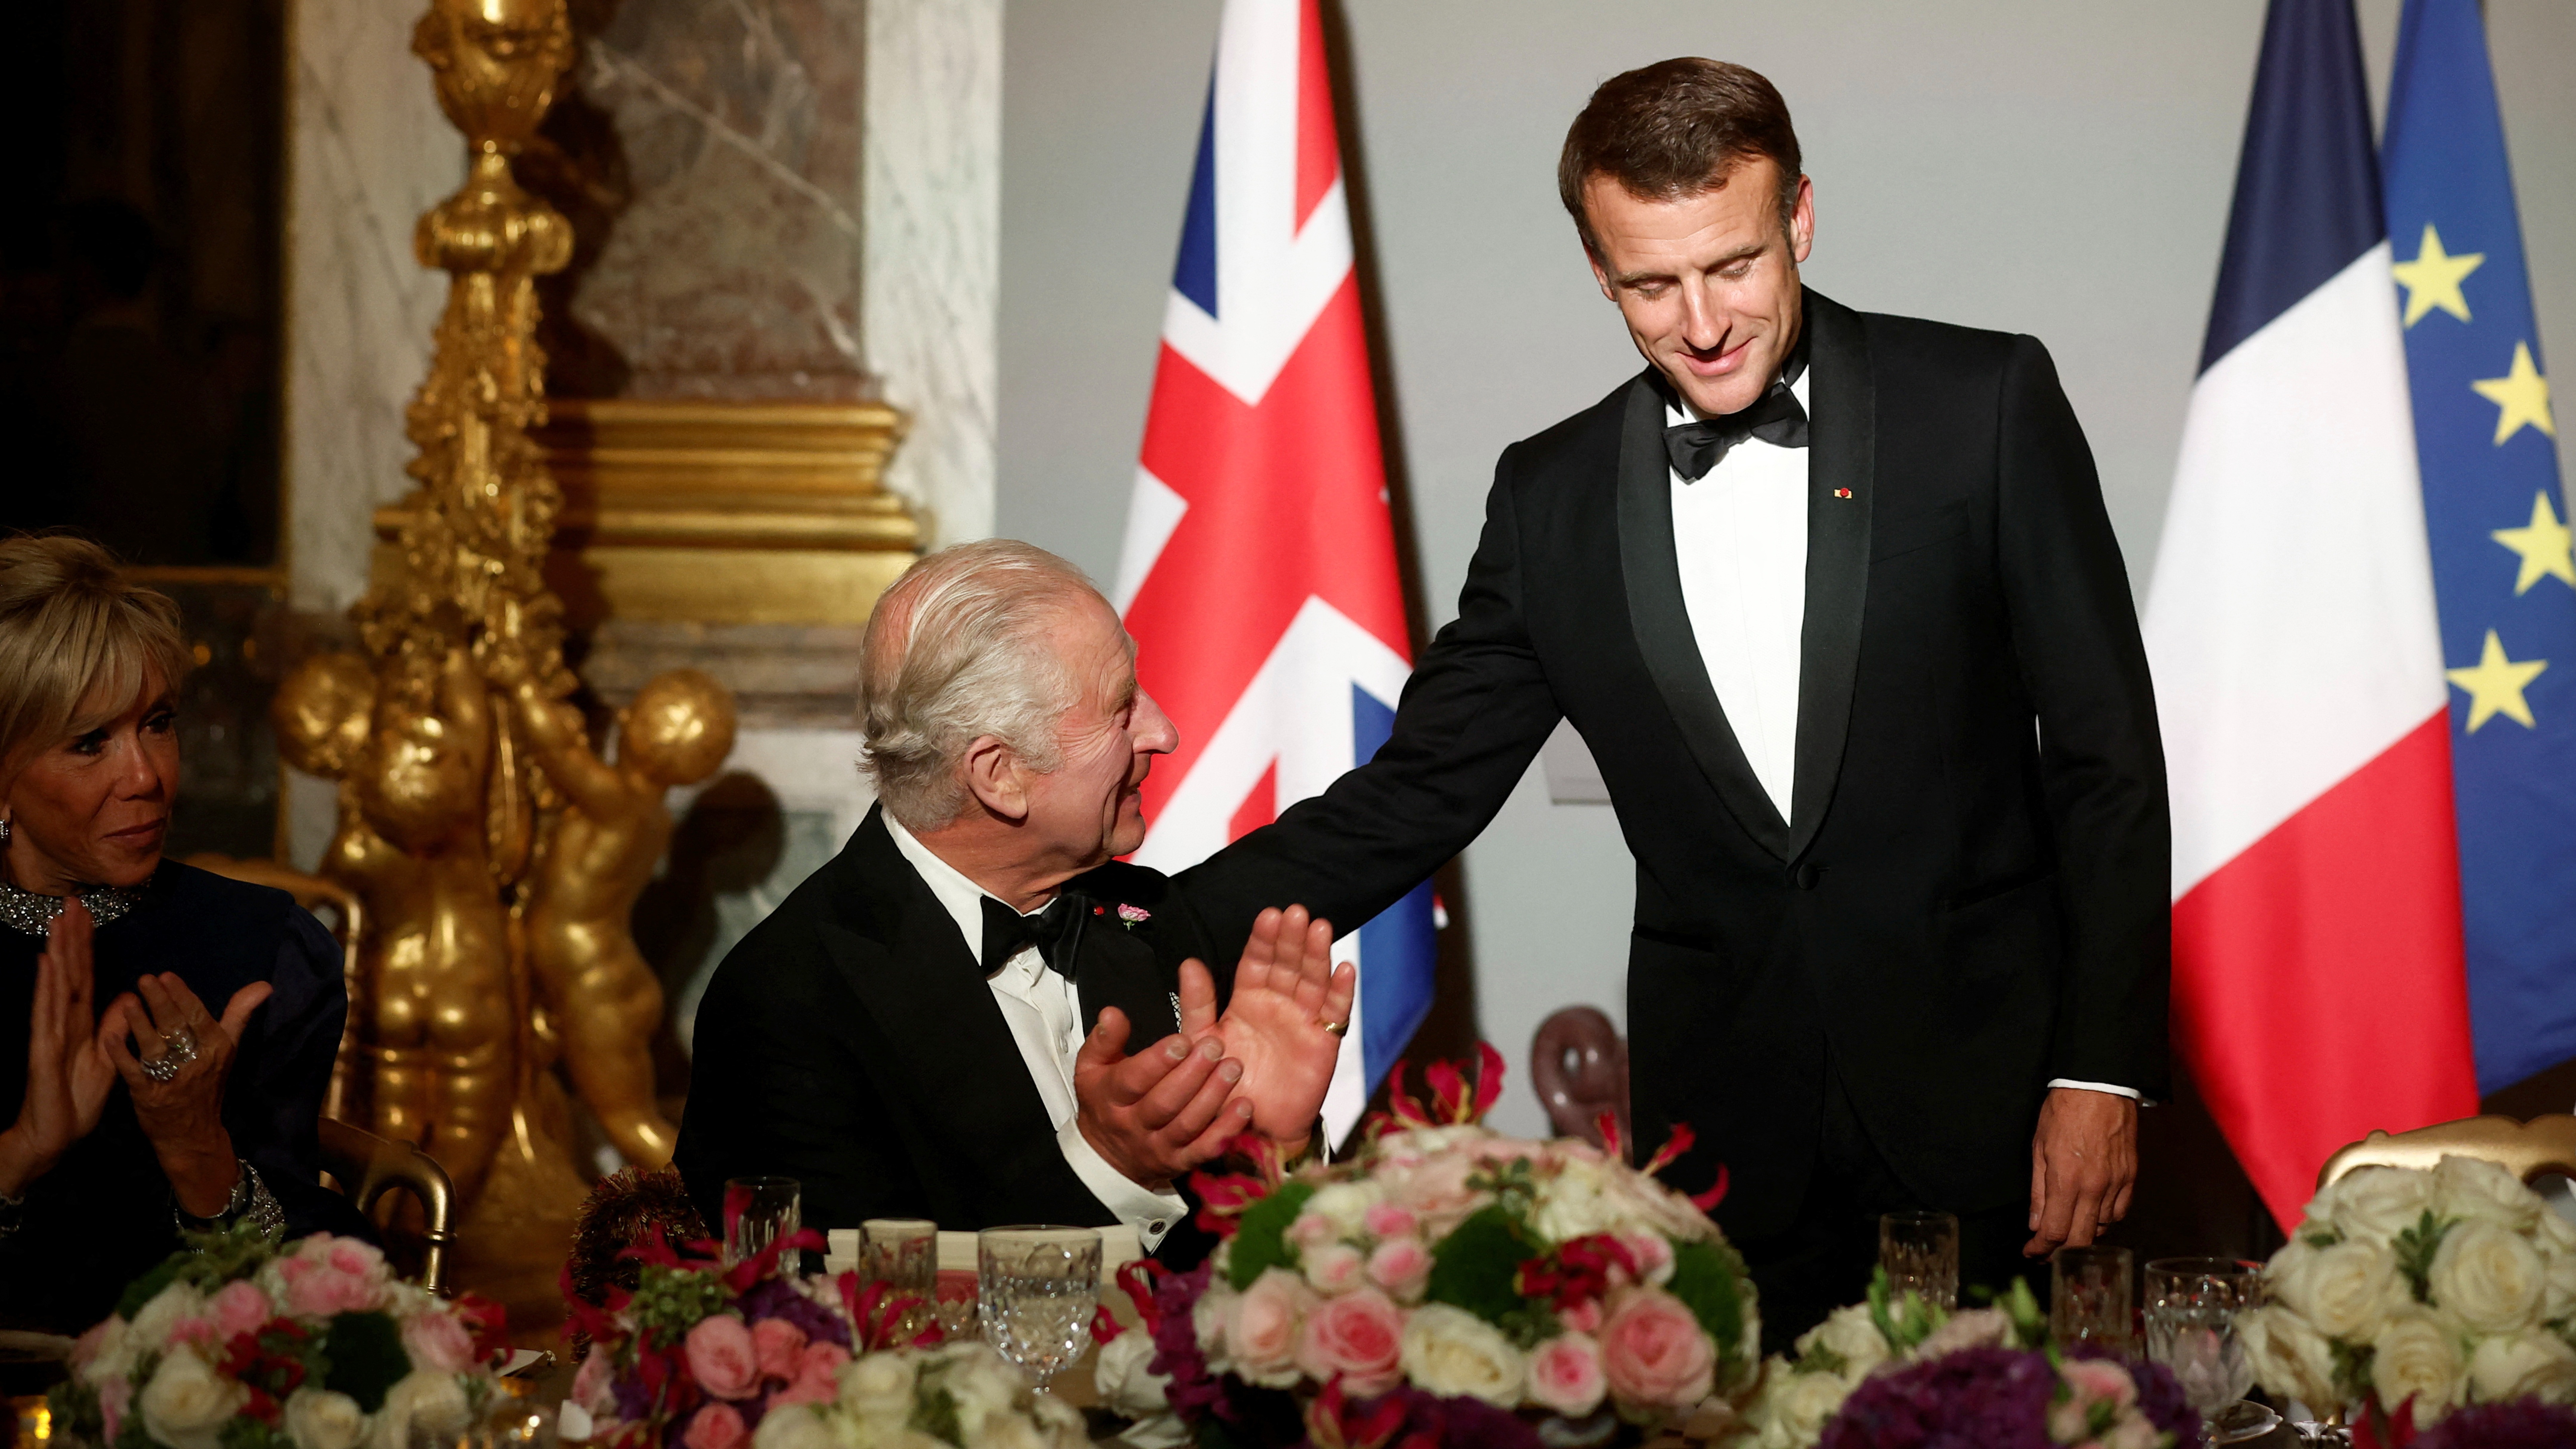 Dior, Diamonds, Dinner: King Charles, Camilla's French State Visit